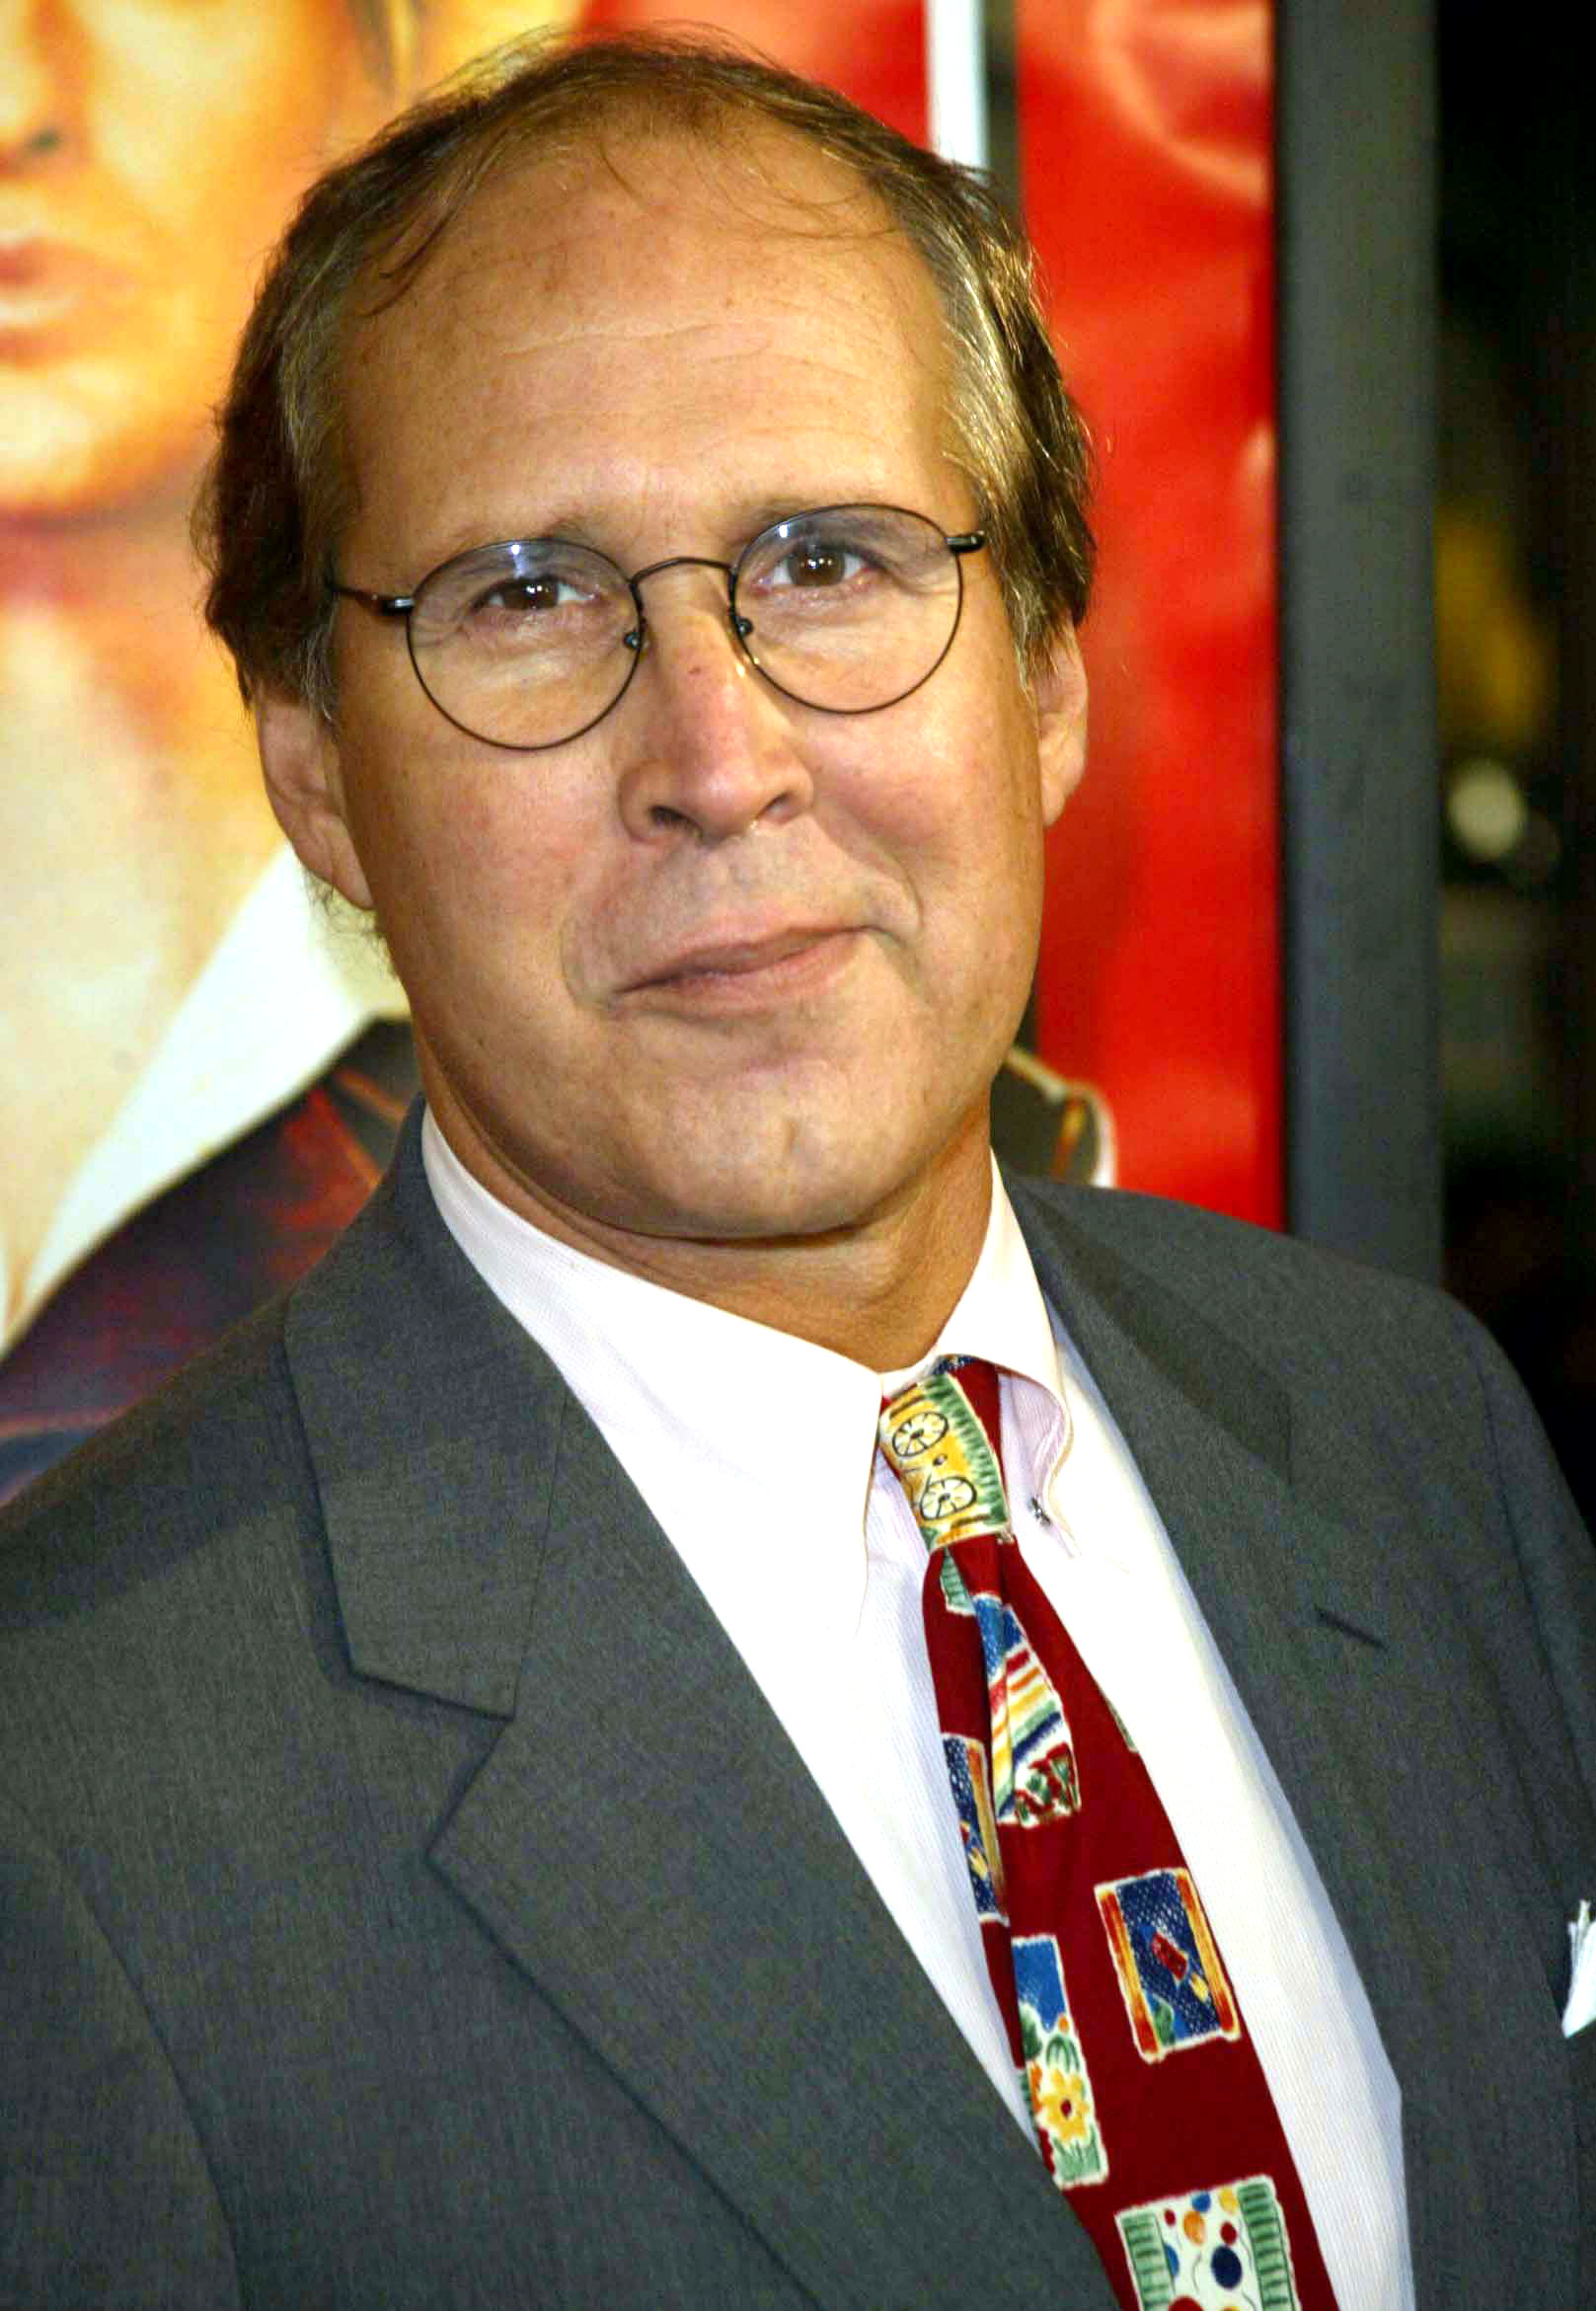 Chevy chase naked - 🧡 Chevy Chase (Мила Альпер) / Стихи.ру.